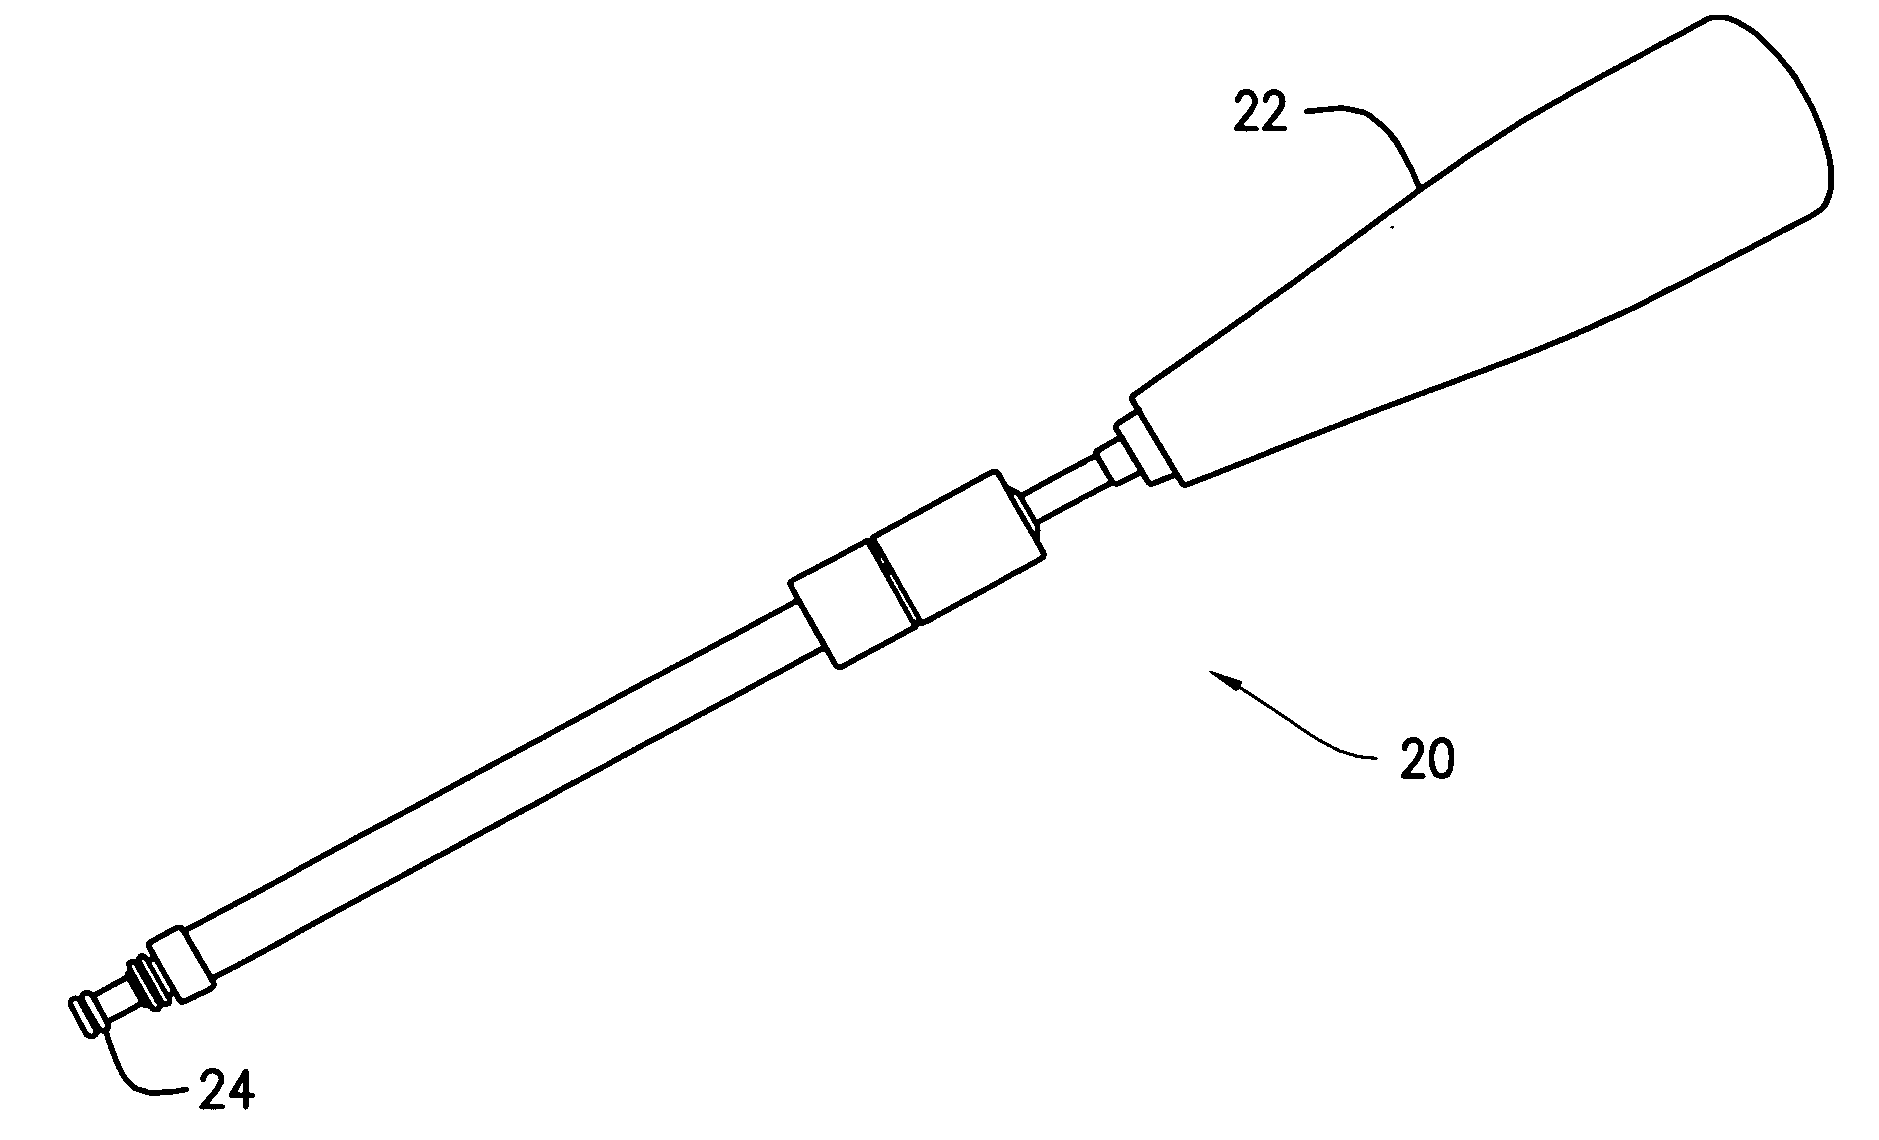 Polyaxial screwdriver for a pedicle screw system